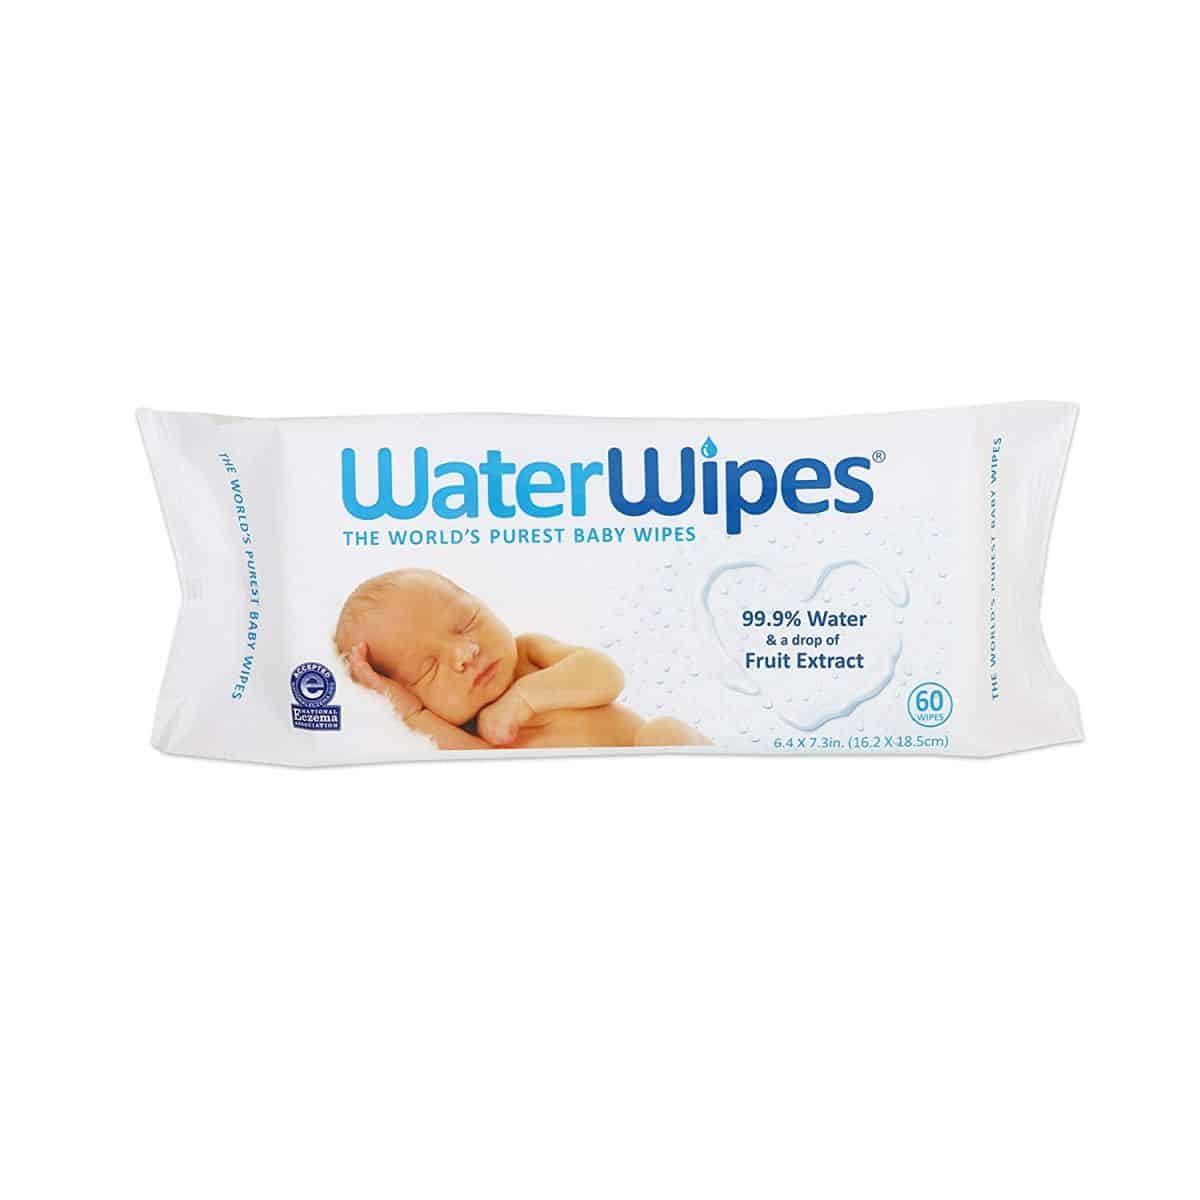 https://www.babyamore.in/wp-content/uploads/2019/02/Water-Wipes-60-Wipes-1.jpg